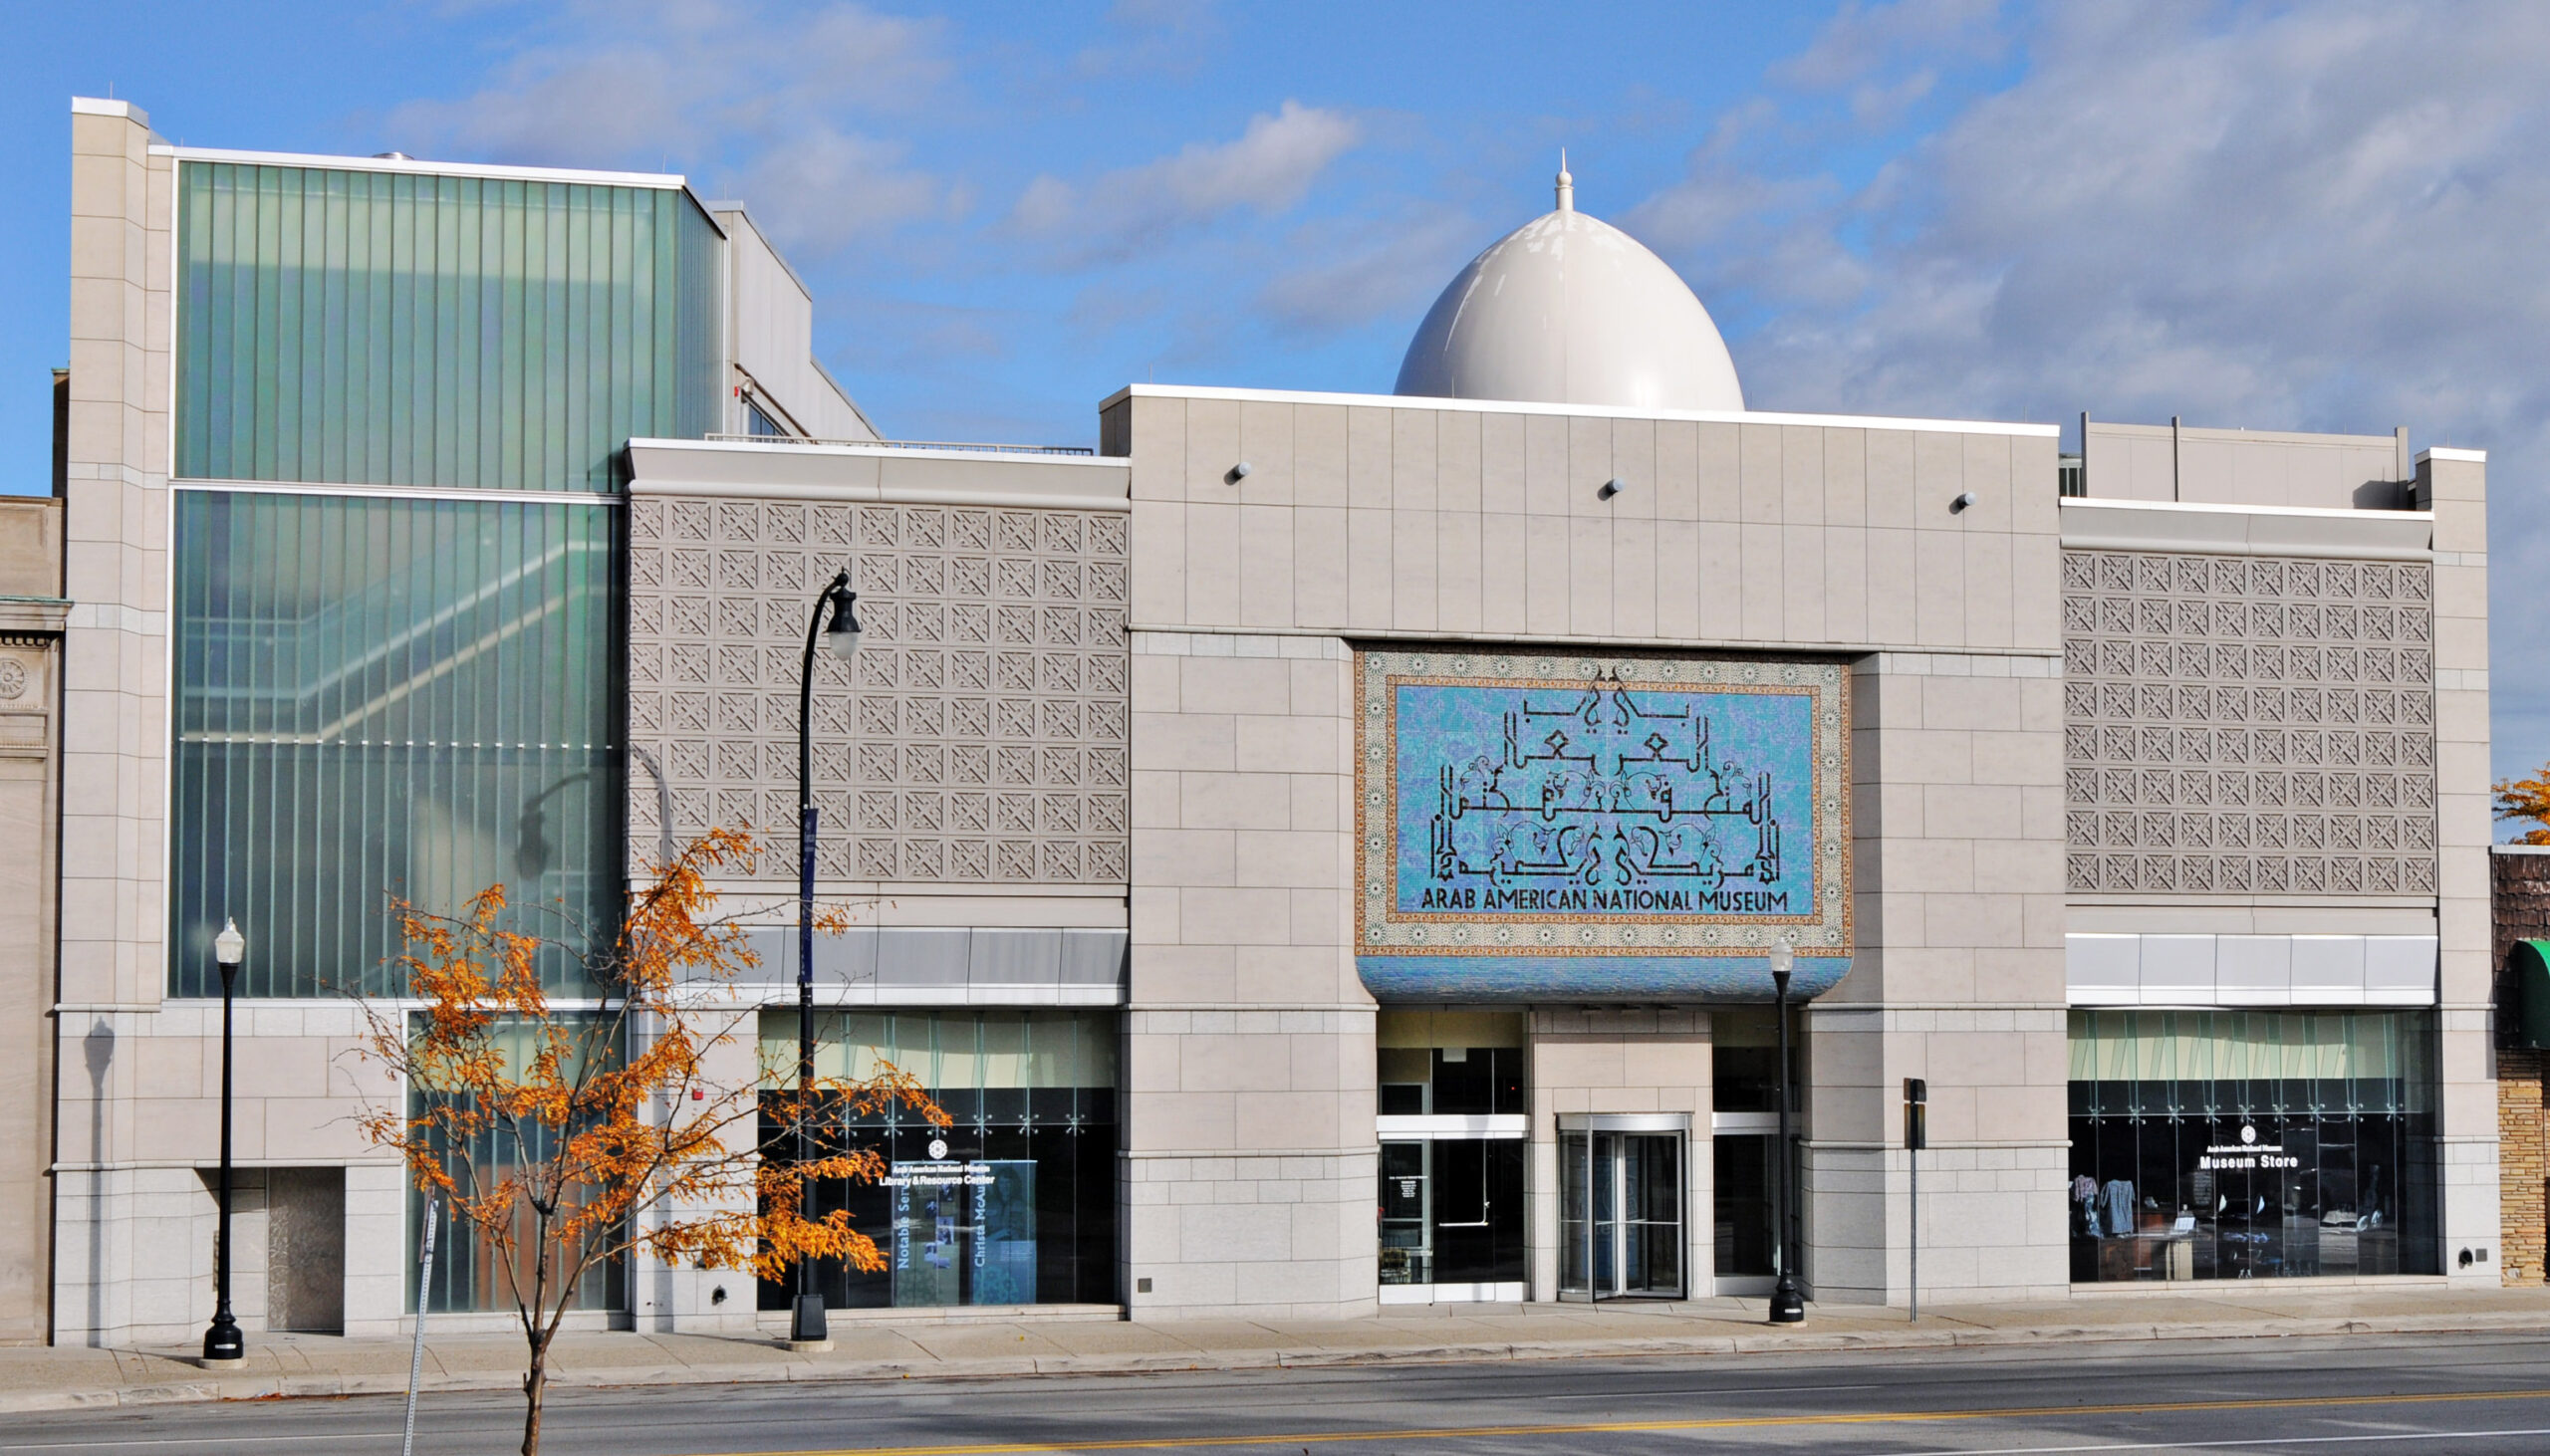 Arab American National Museum – FREE for Kids 5 and under, FREE with SNAP/EBT or WIC card